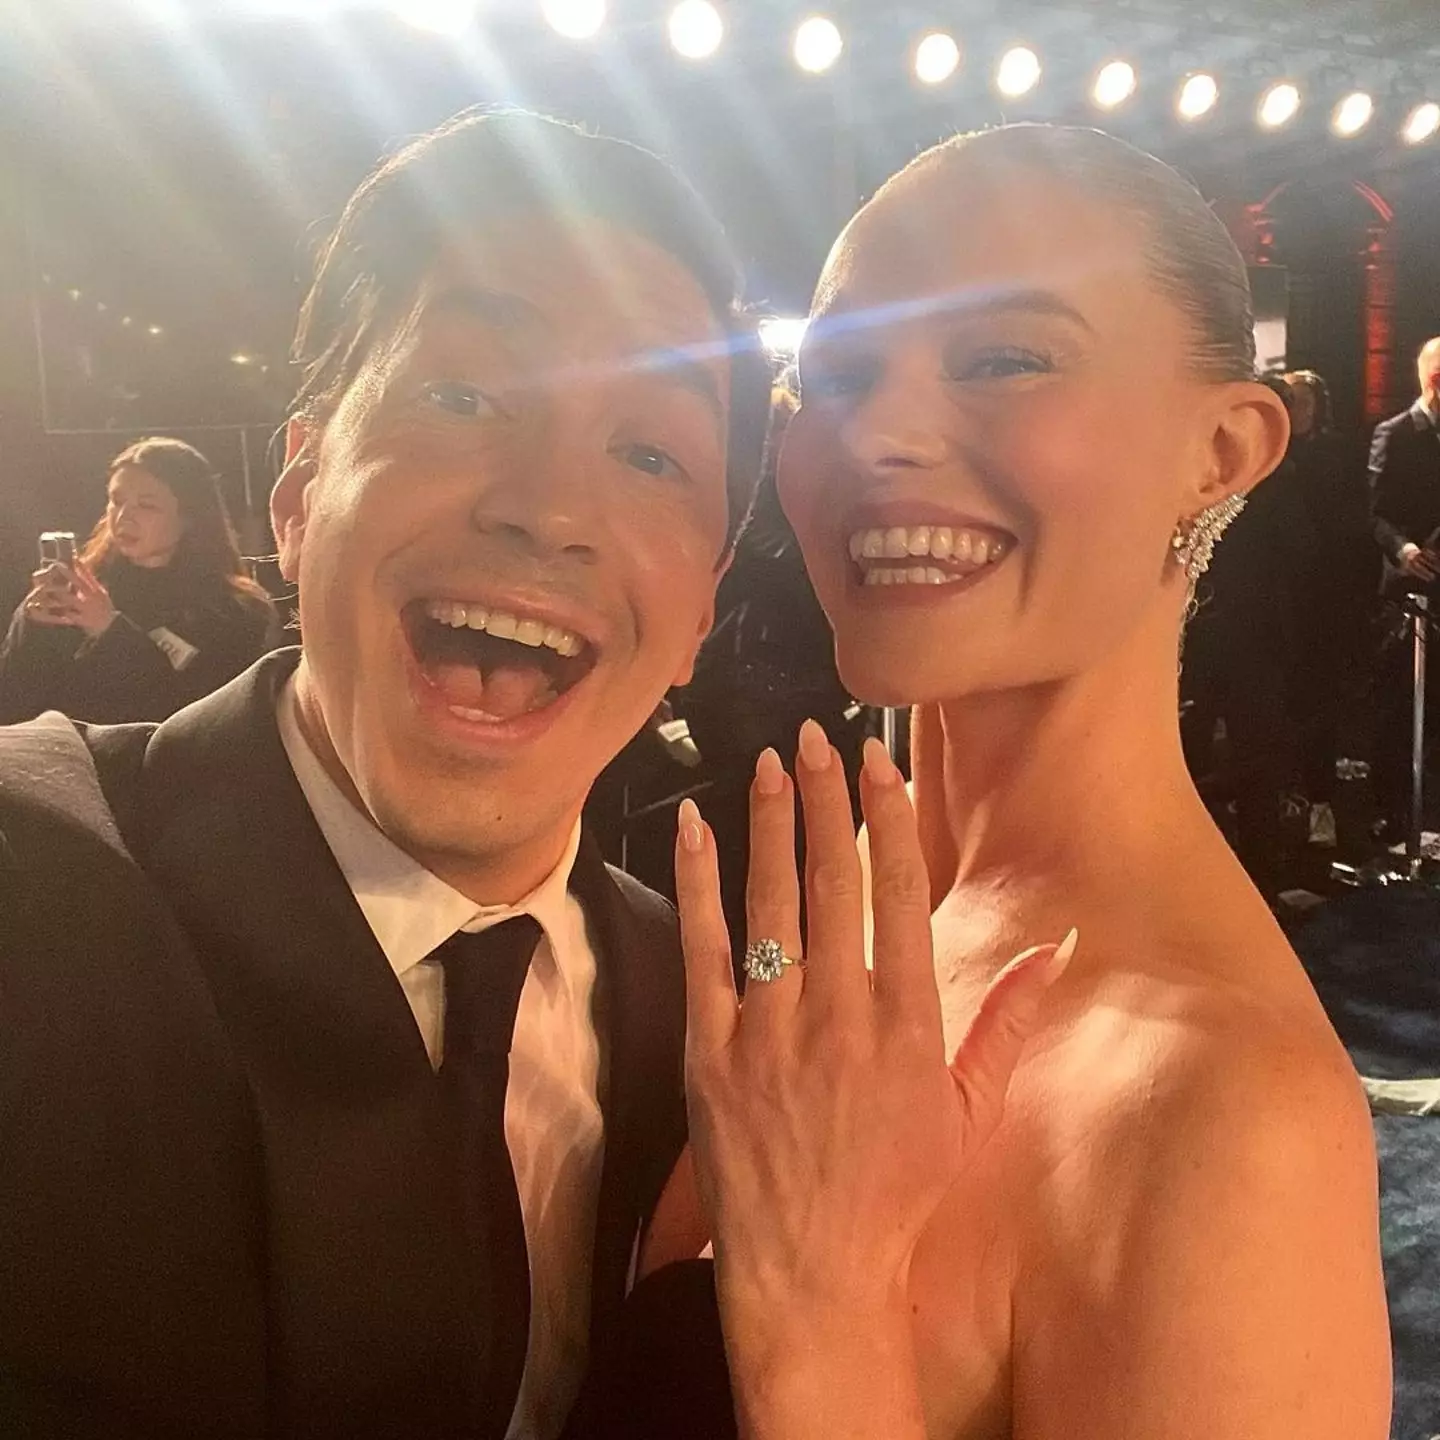 Justin Long has admitted that his therapist convinced him to propose to Kate Bosworth.